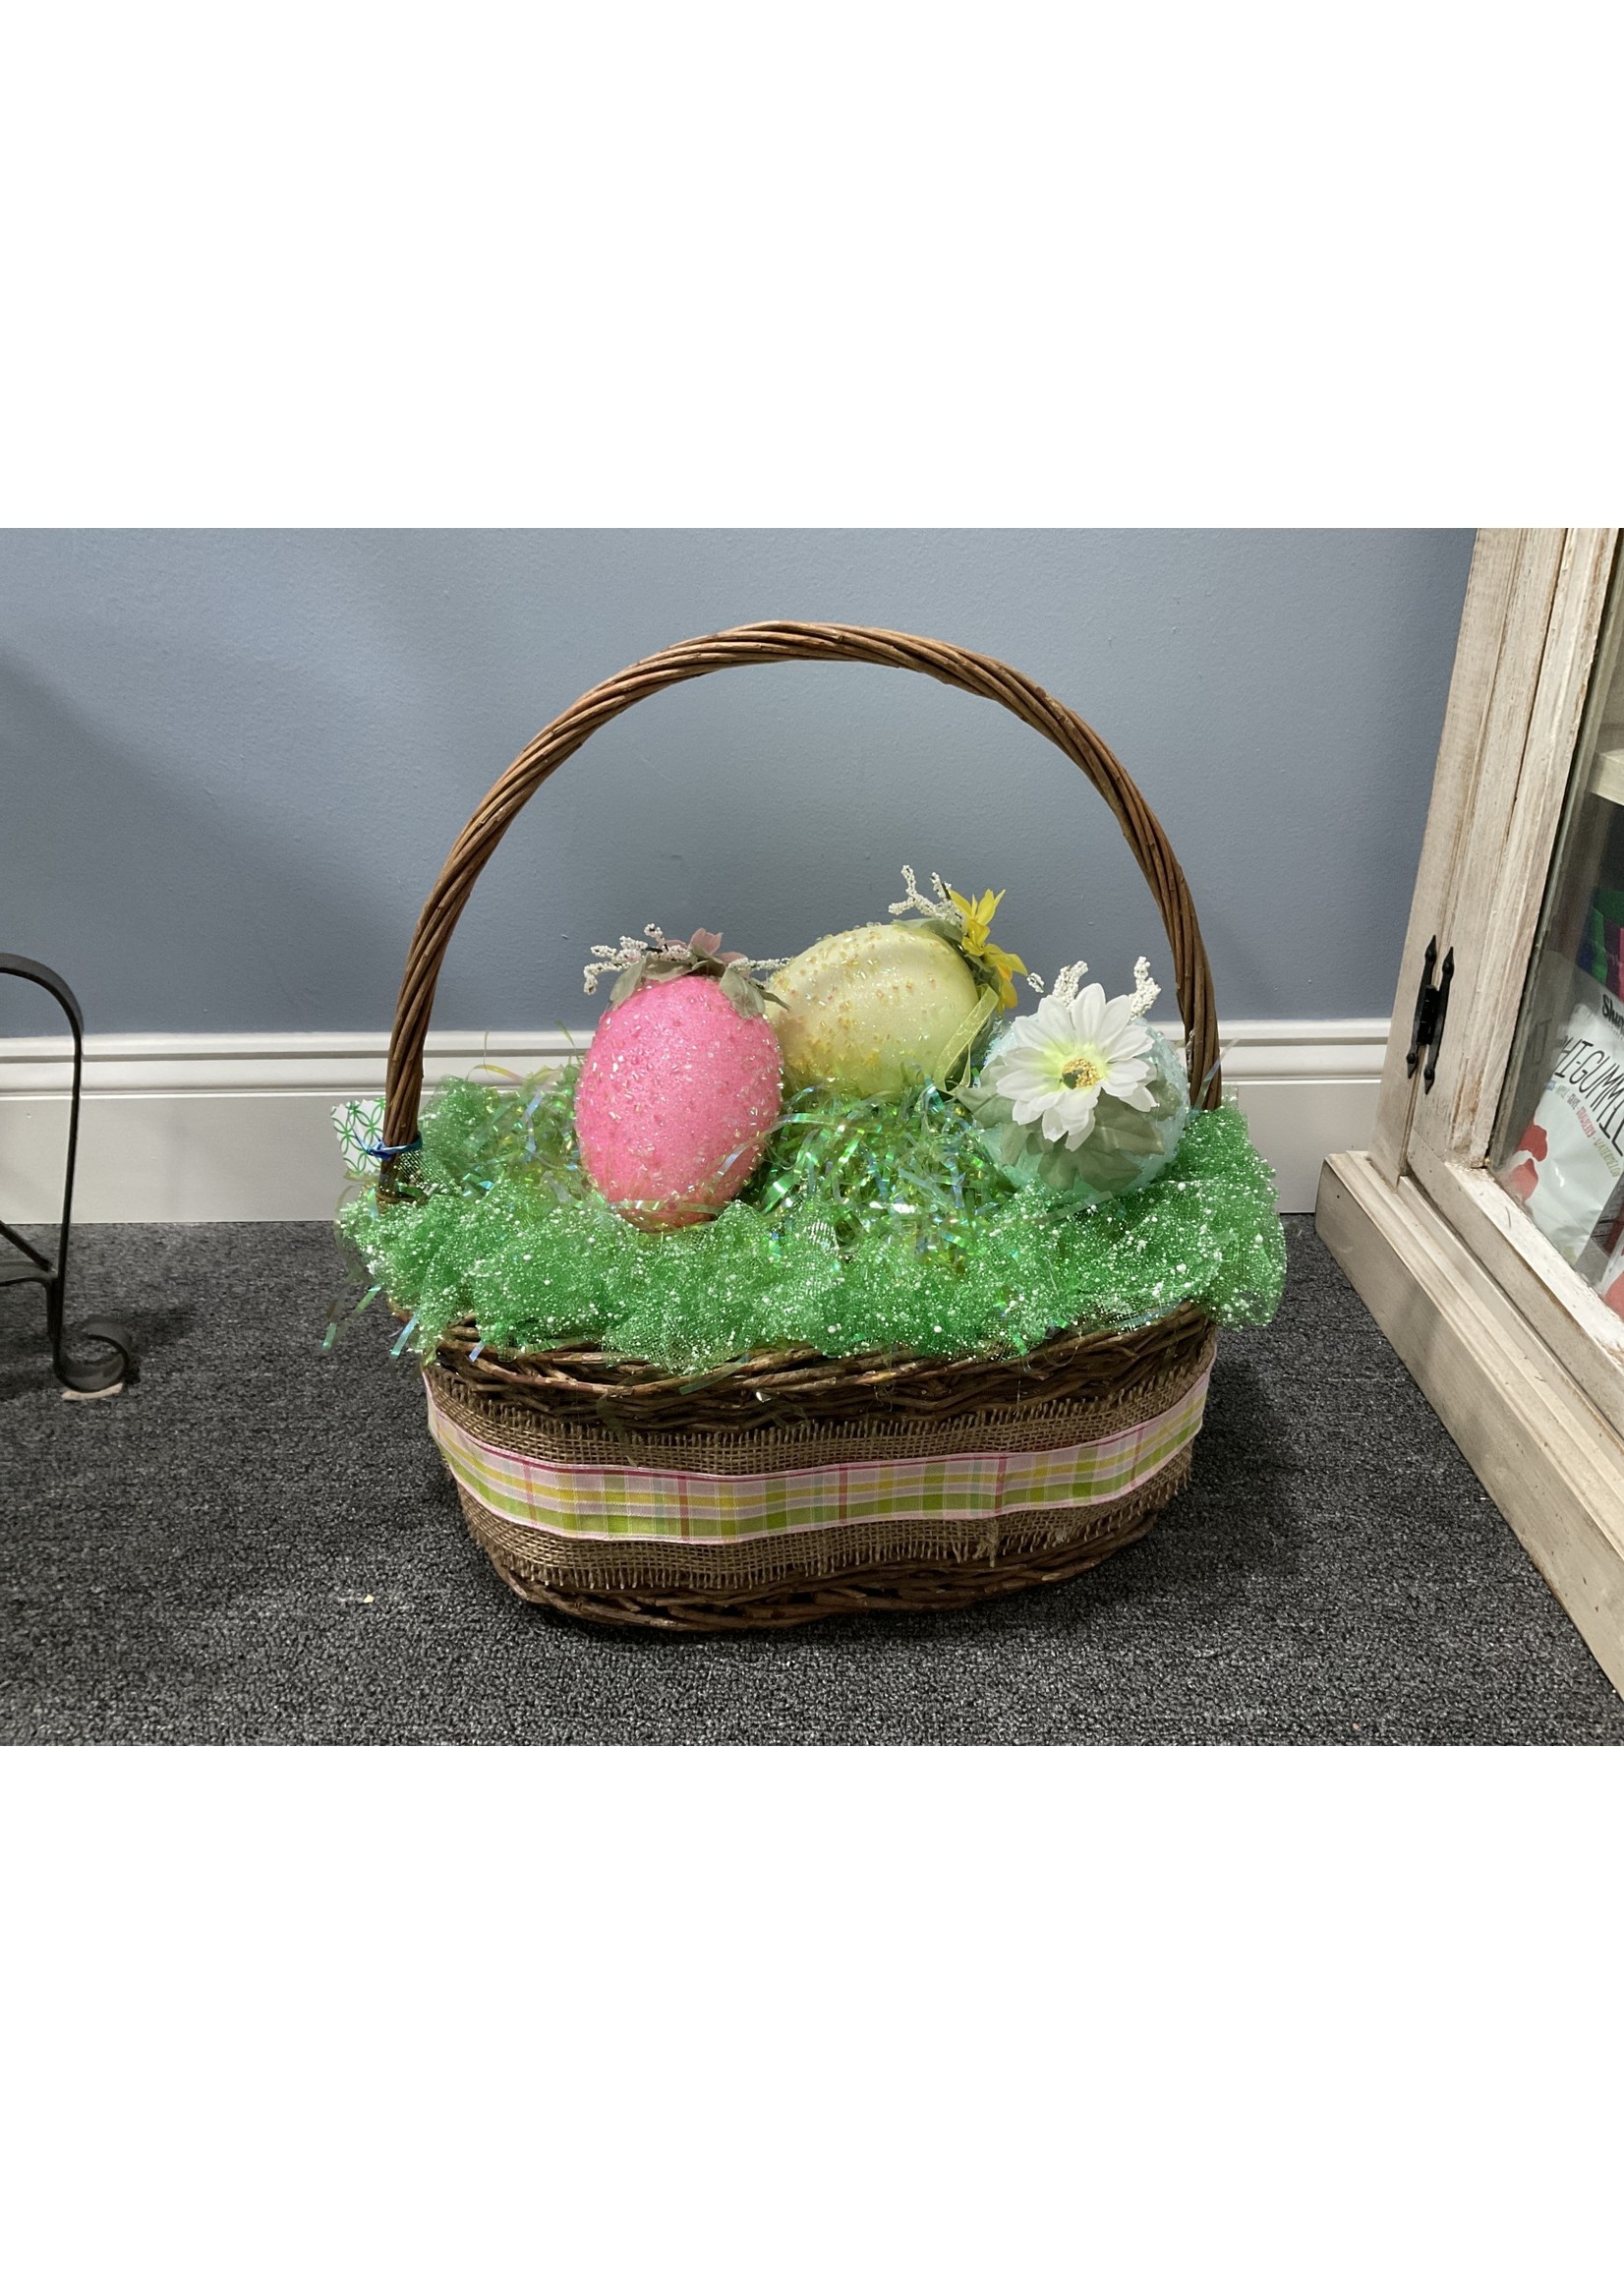 My New Favorite Thing Centerpiece Easter Basket w/3 Large Eggs in Grass